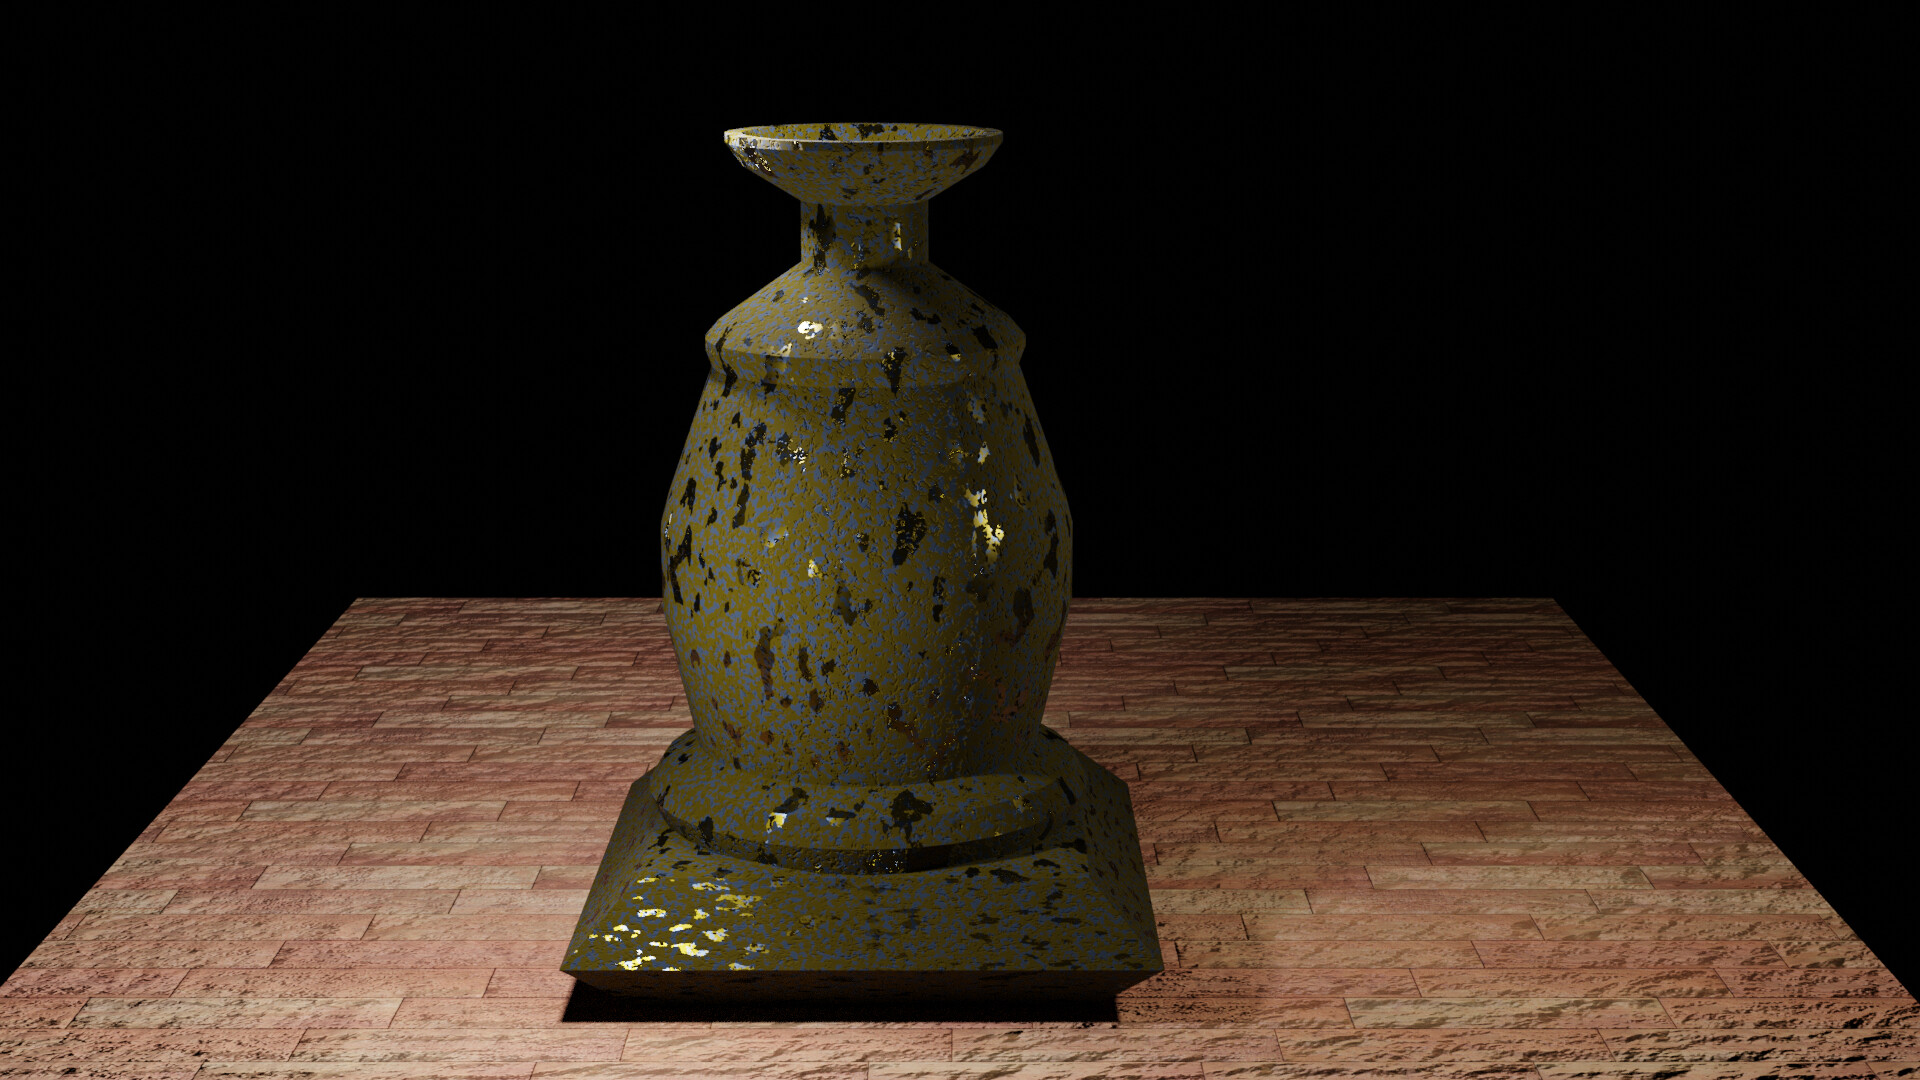 Ancient Gold - Finished Projects - Blender Artists Community